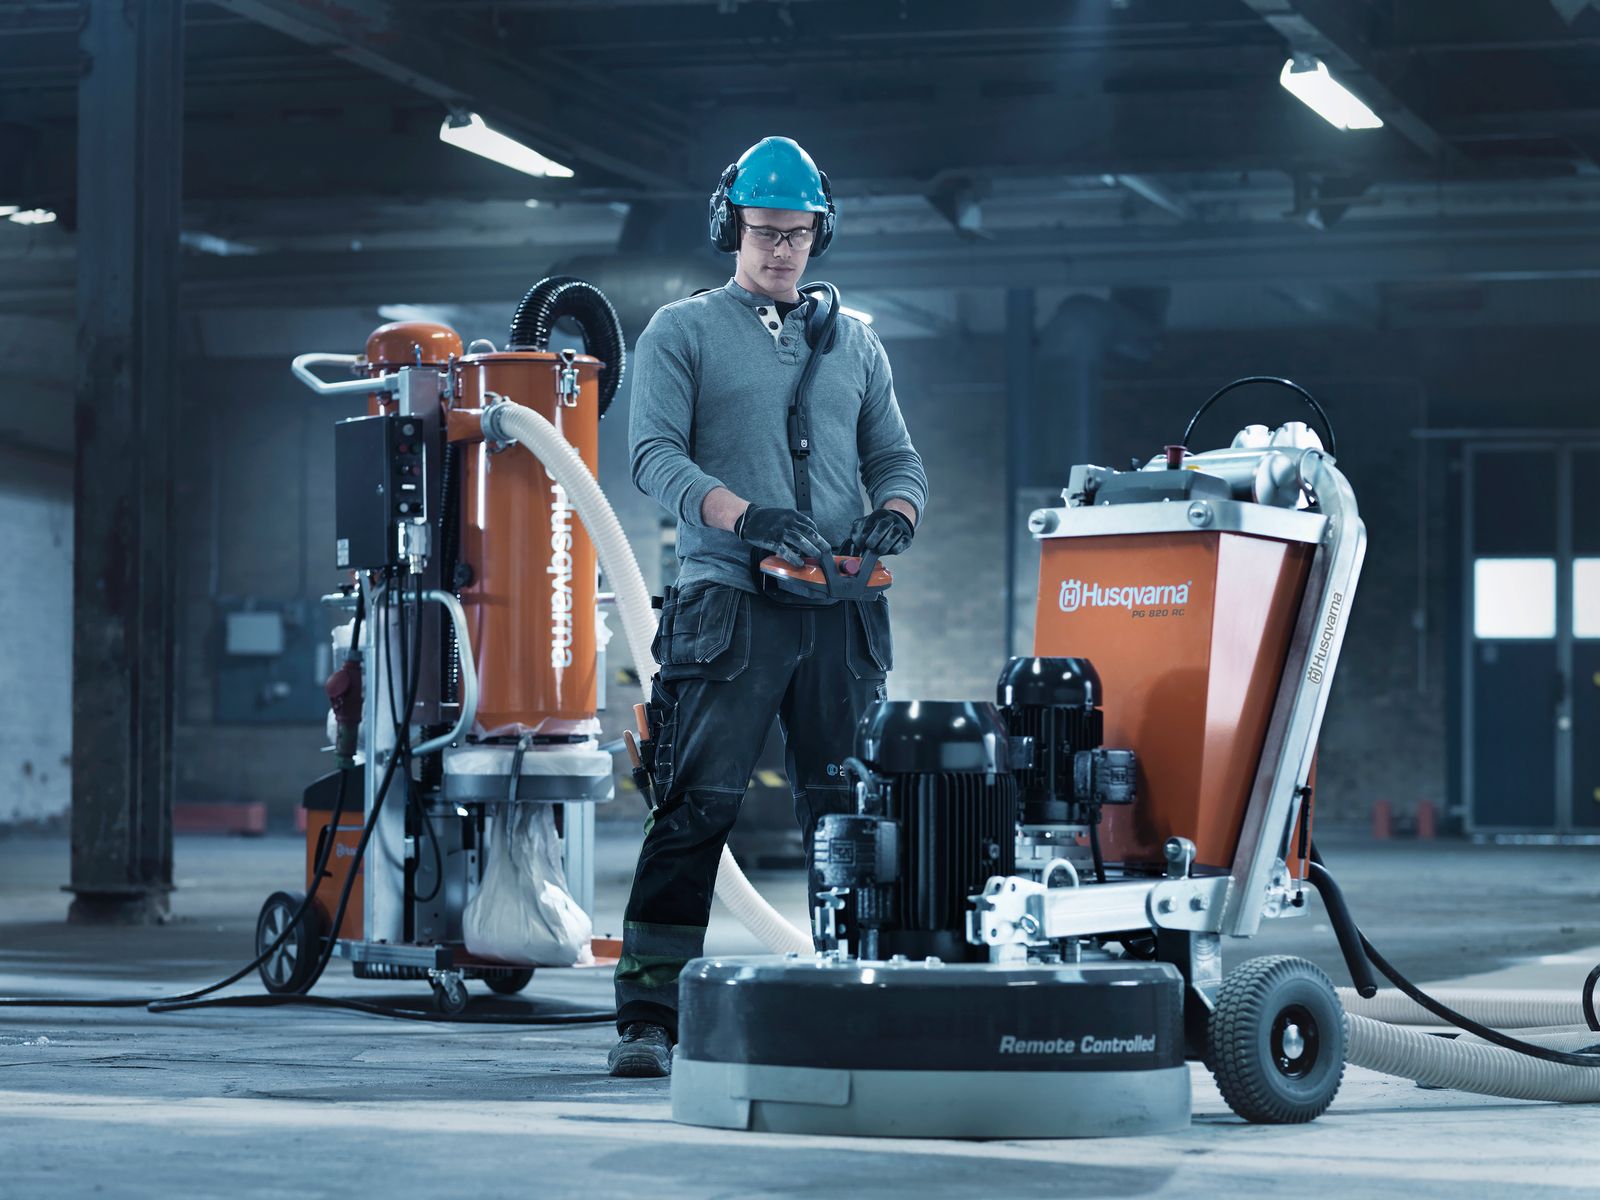 Increase your productivity with the new Husqvarna PG 820 RC